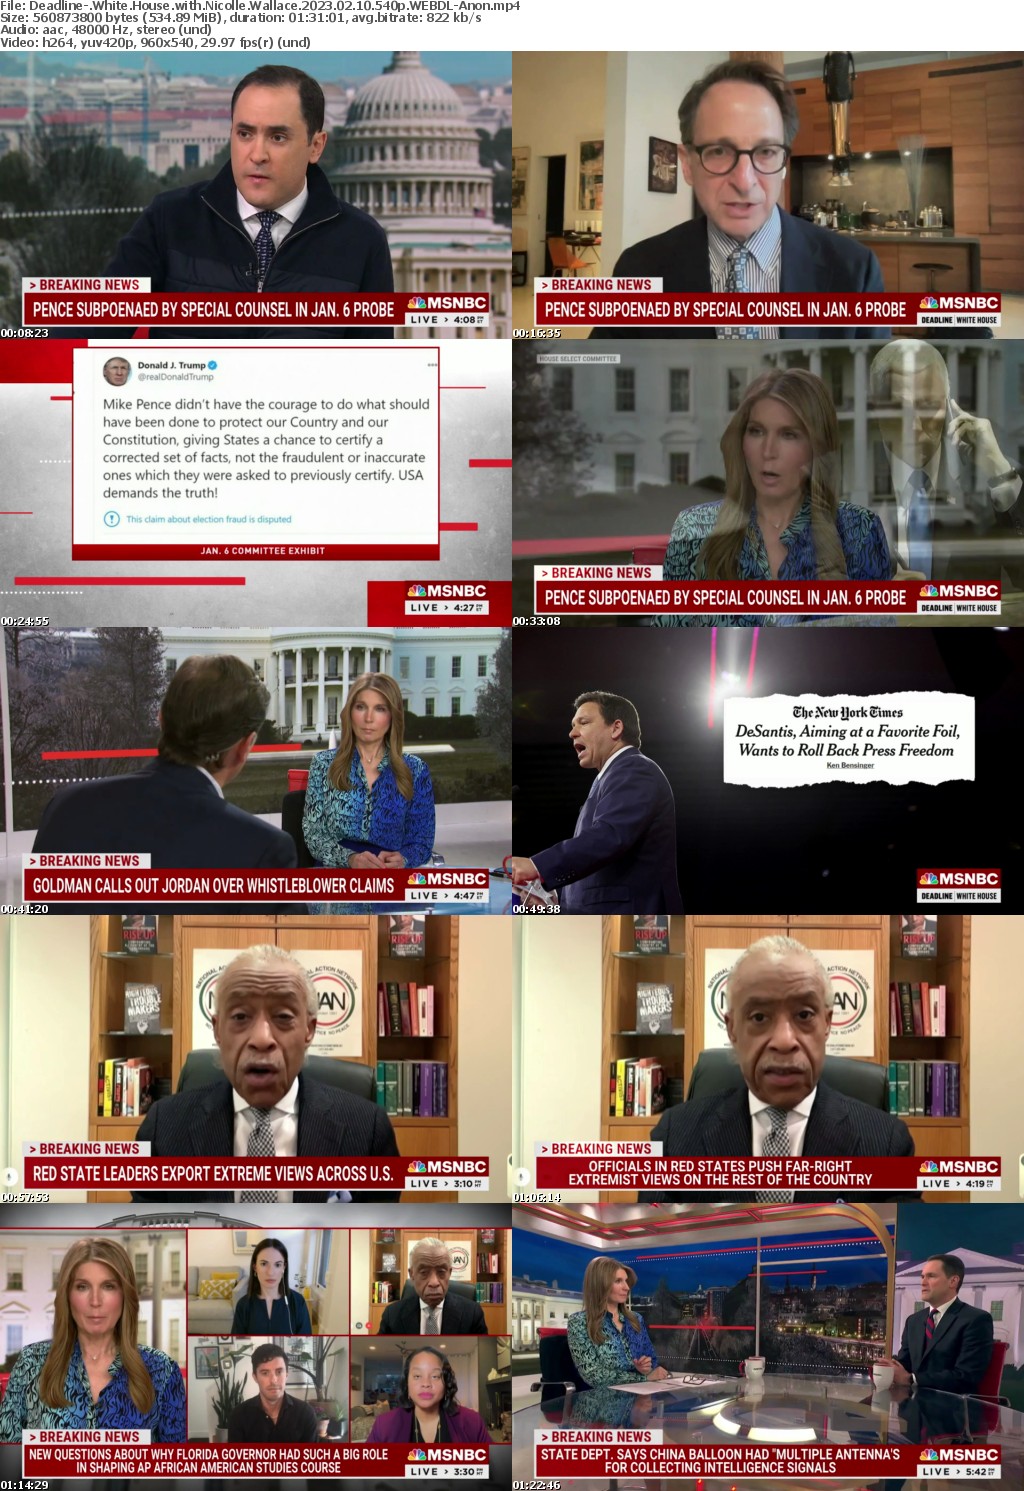 Deadline- White House with Nicolle Wallace 2023 02 10 540p WEBDL-Anon